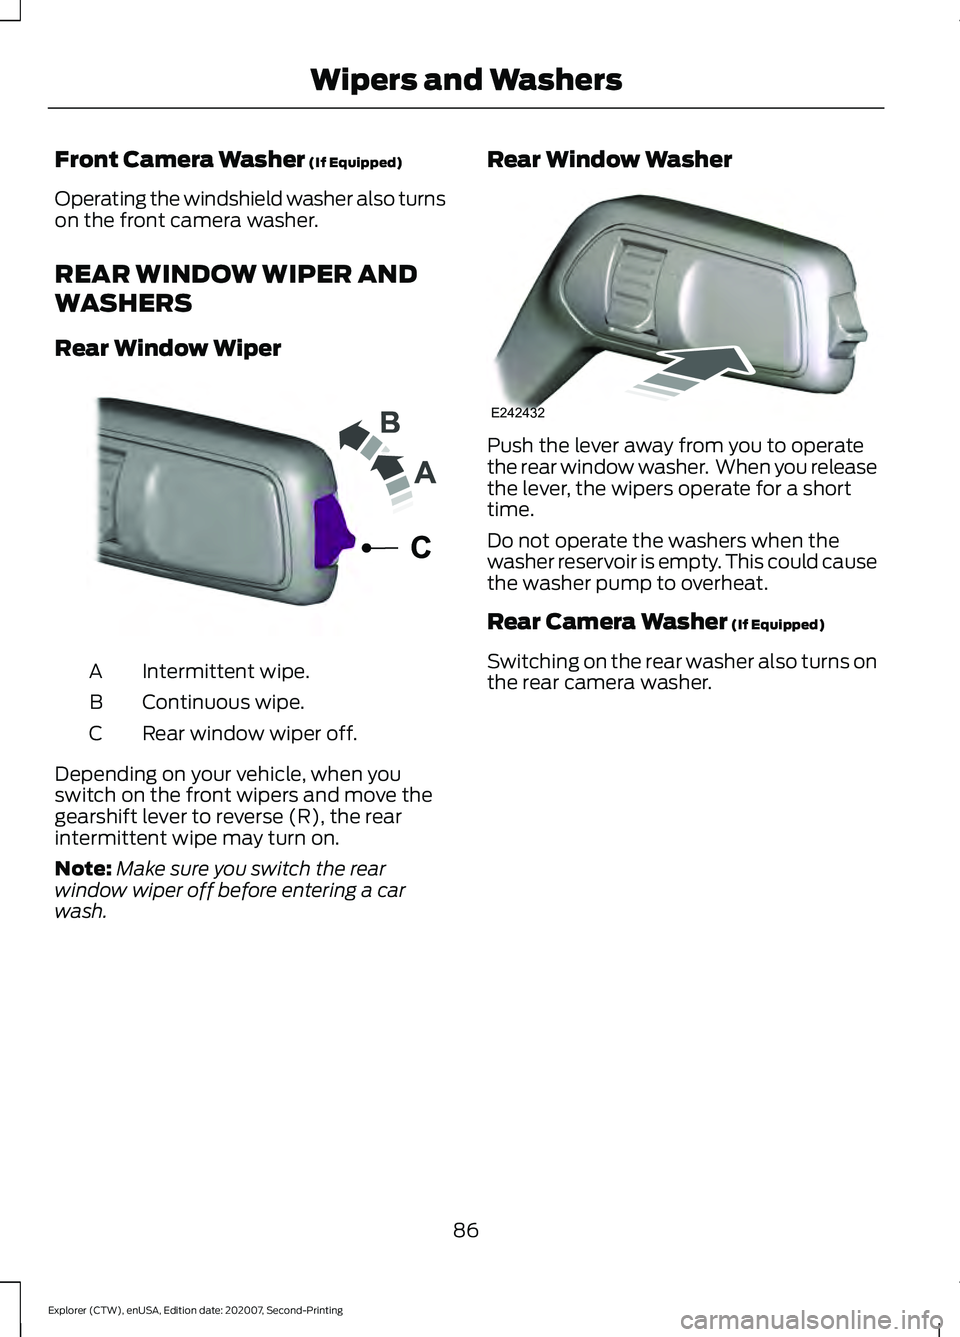 FORD EXPLORER 2021  Owners Manual Front Camera Washer (If Equipped)
Operating the windshield washer also turns
on the front camera washer.
REAR WINDOW WIPER AND
WASHERS
Rear Window Wiper Intermittent wipe.
A
Continuous wipe.
B
Rear wi